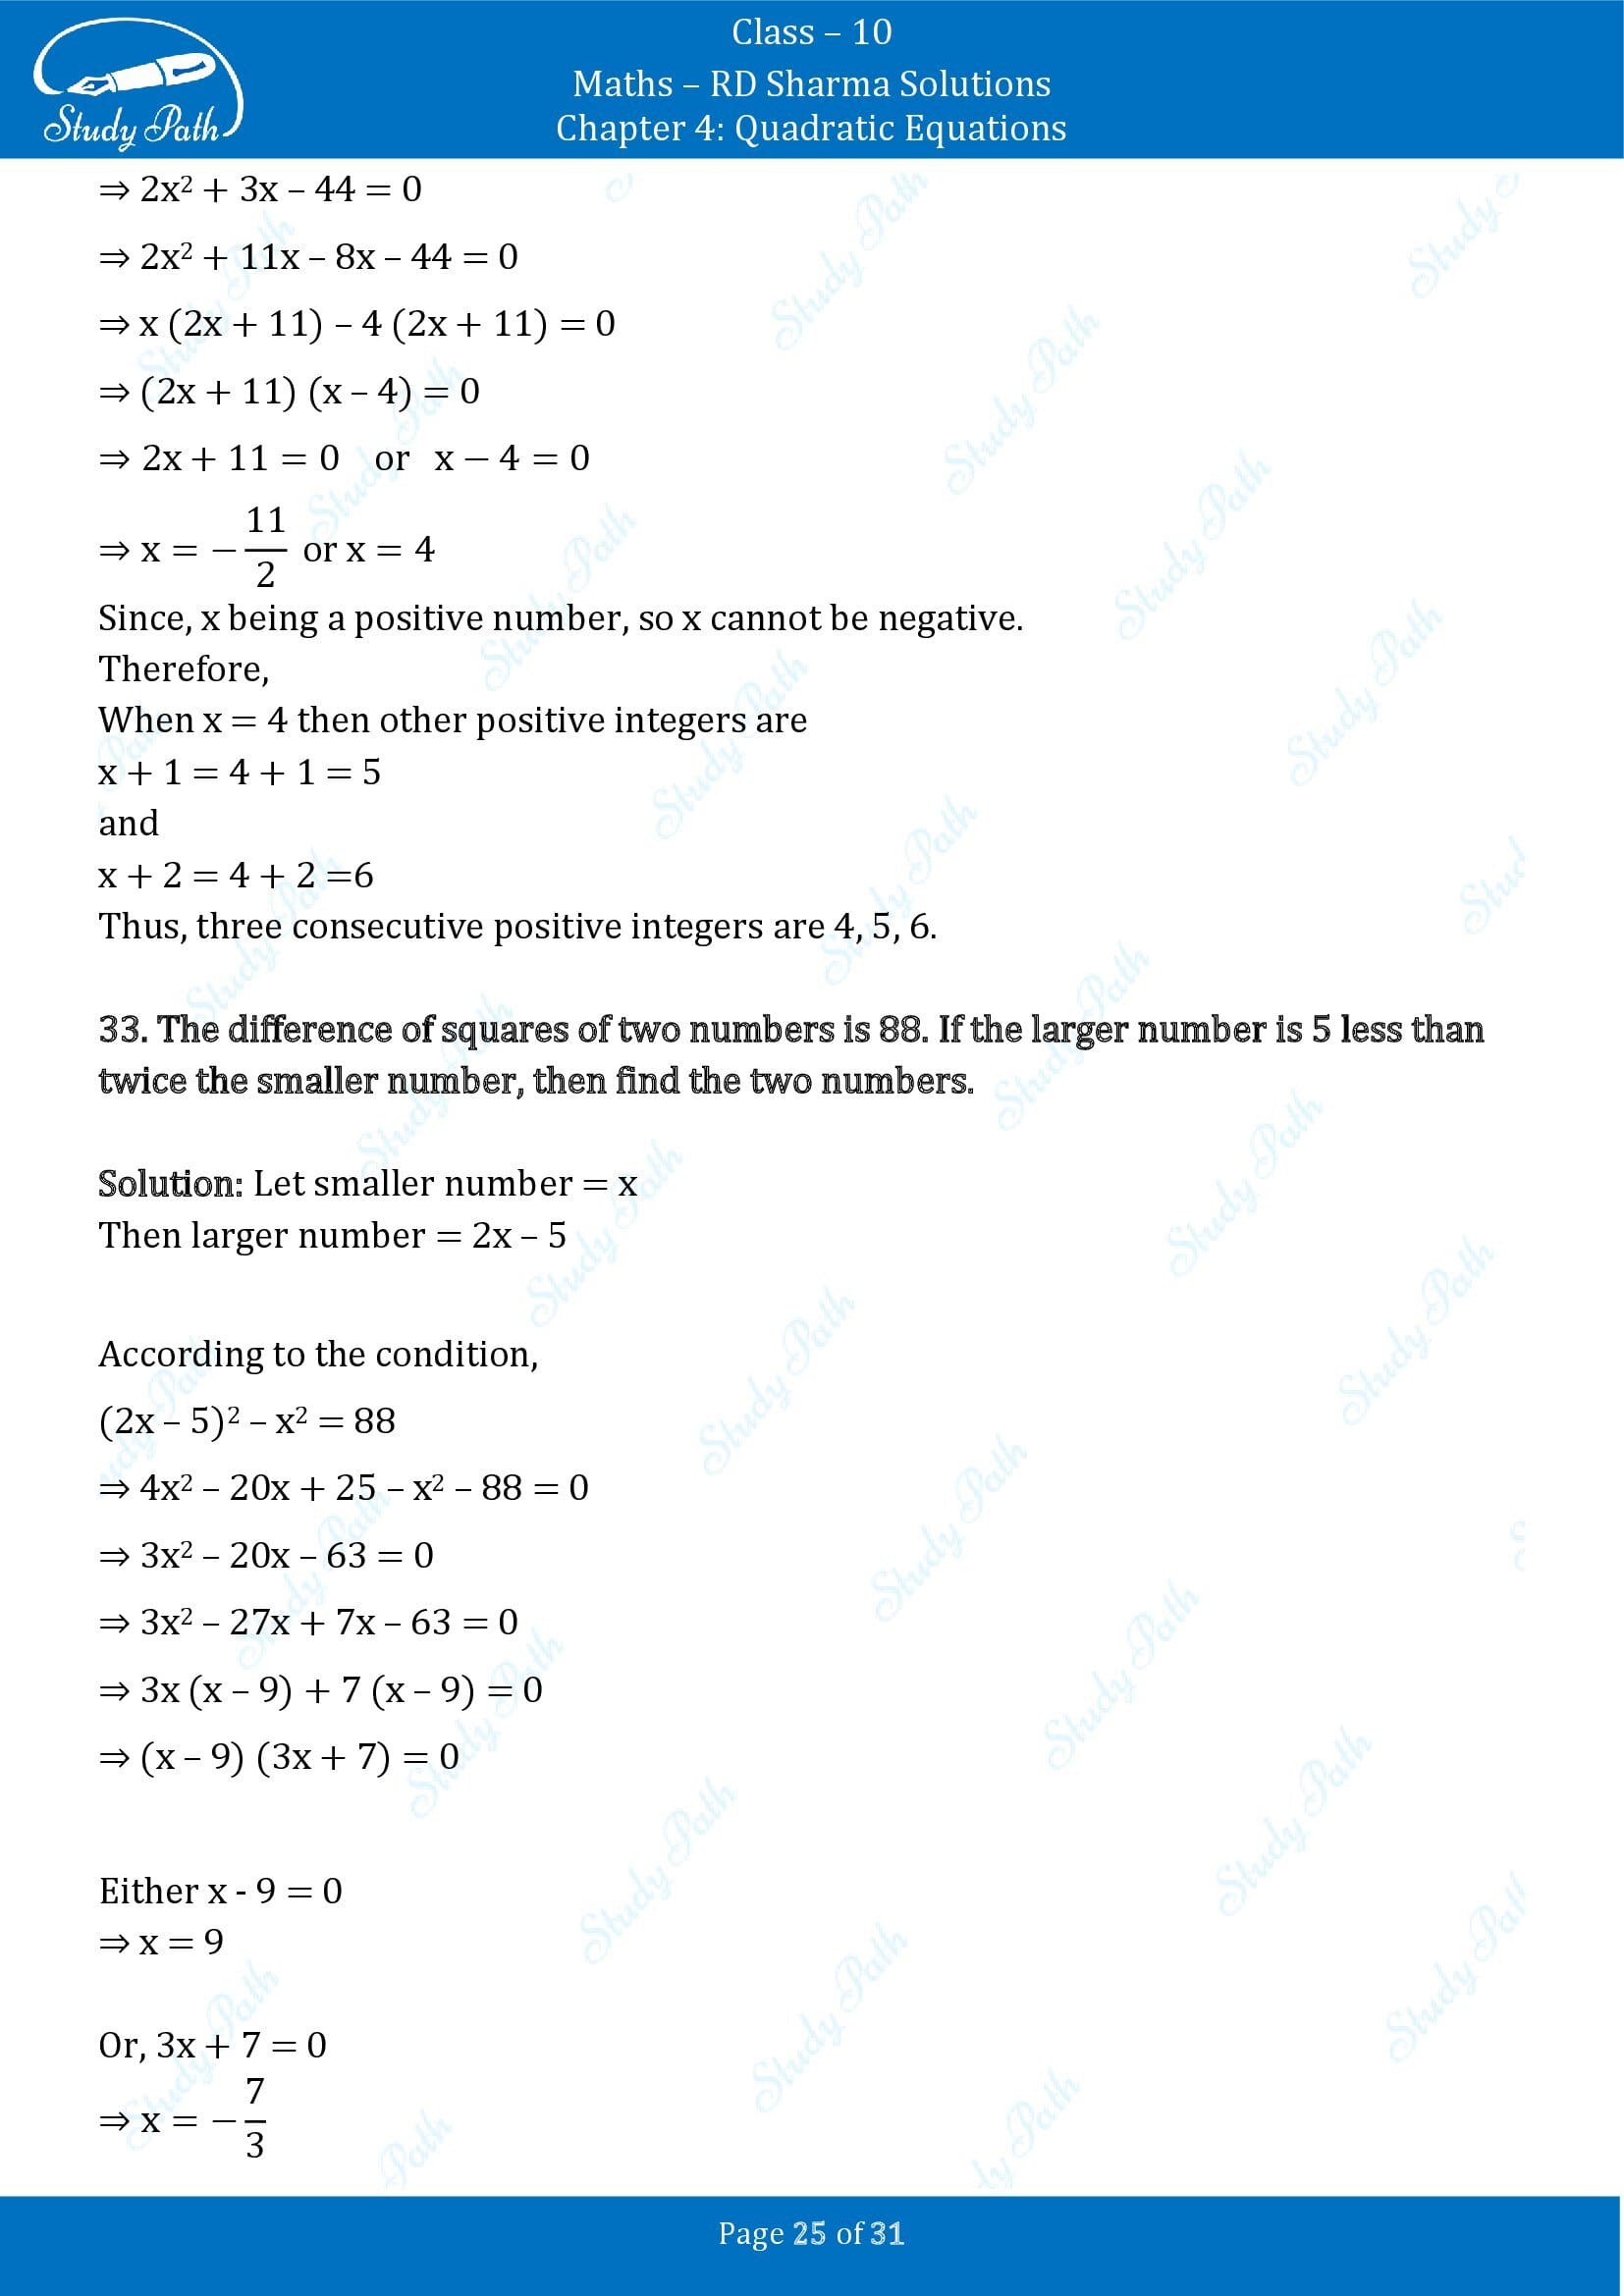 RD Sharma Solutions Class 10 Chapter 4 Quadratic Equations Exercise 4.7 00025